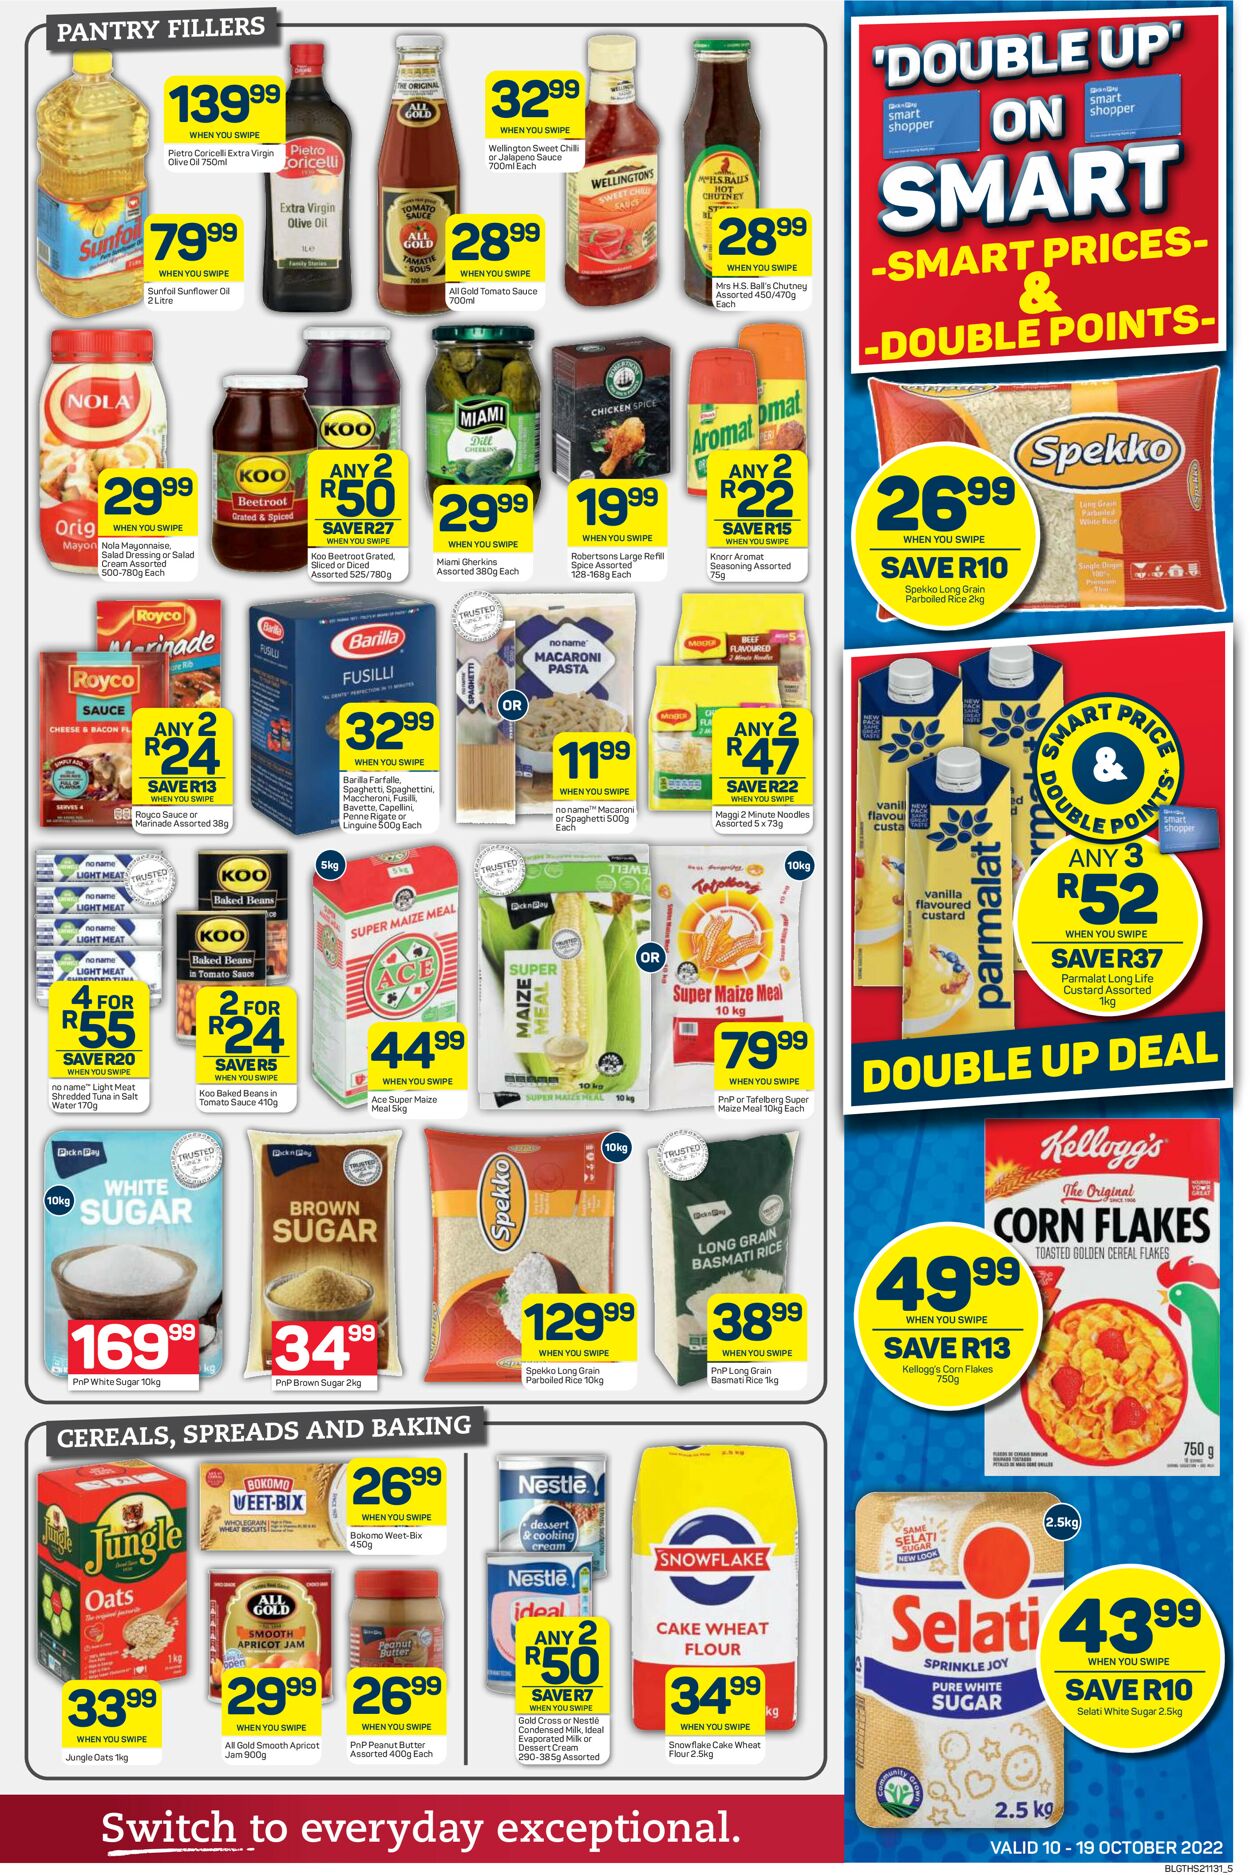 Pick n Pay Catalogue - 2022/10/10-2022/10/19 (Page 5)